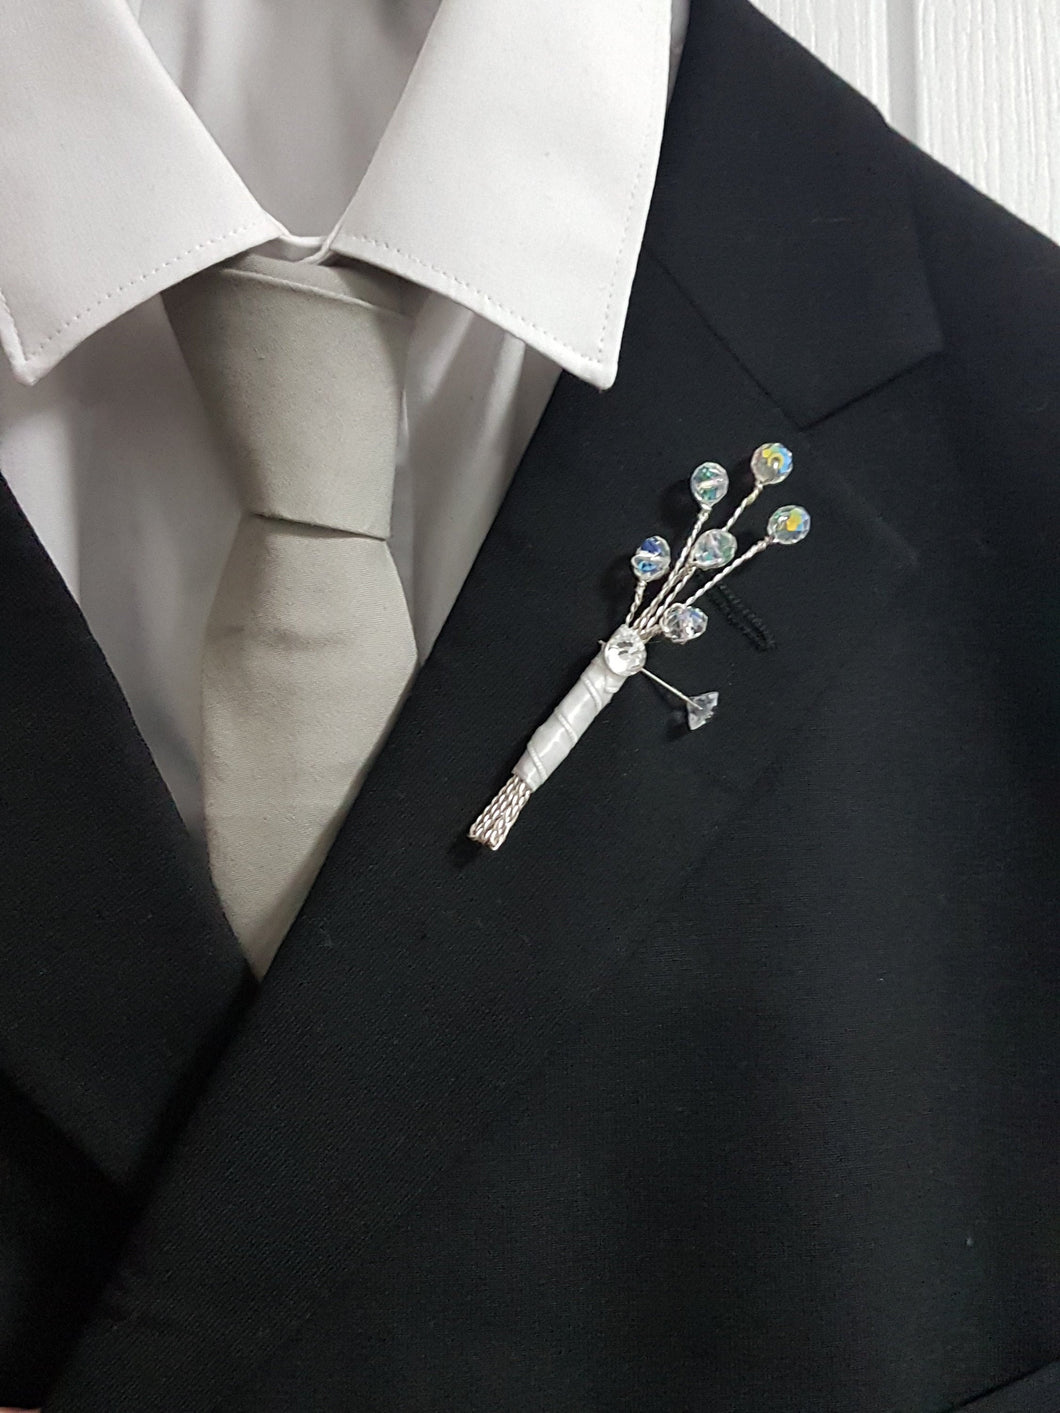 Groom Boutonniere, crystal wire buttonhole  Wedding Buttonhole Pin.  Wedding Boutonnière by Crystal wedding uk